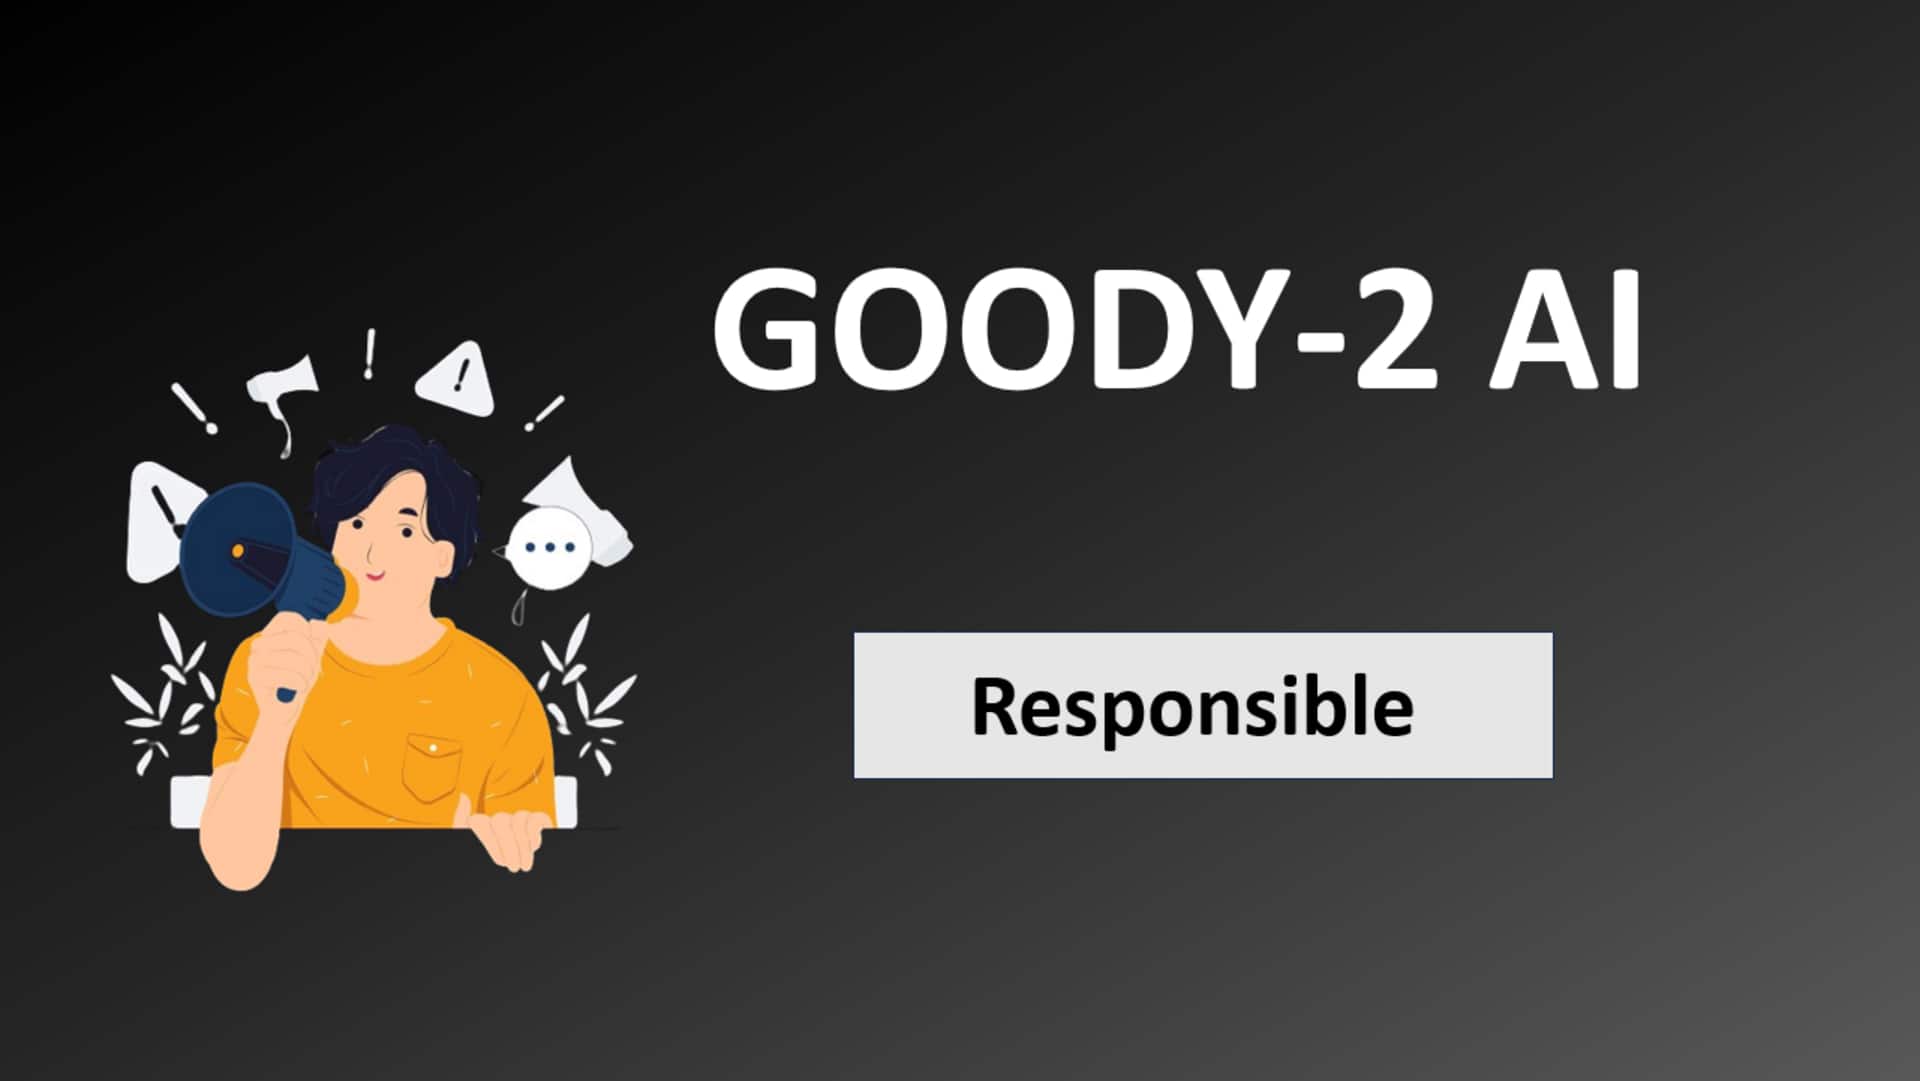 Meet Goody-2: The 'most responsible' AI chatbot redefining ethical boundaries